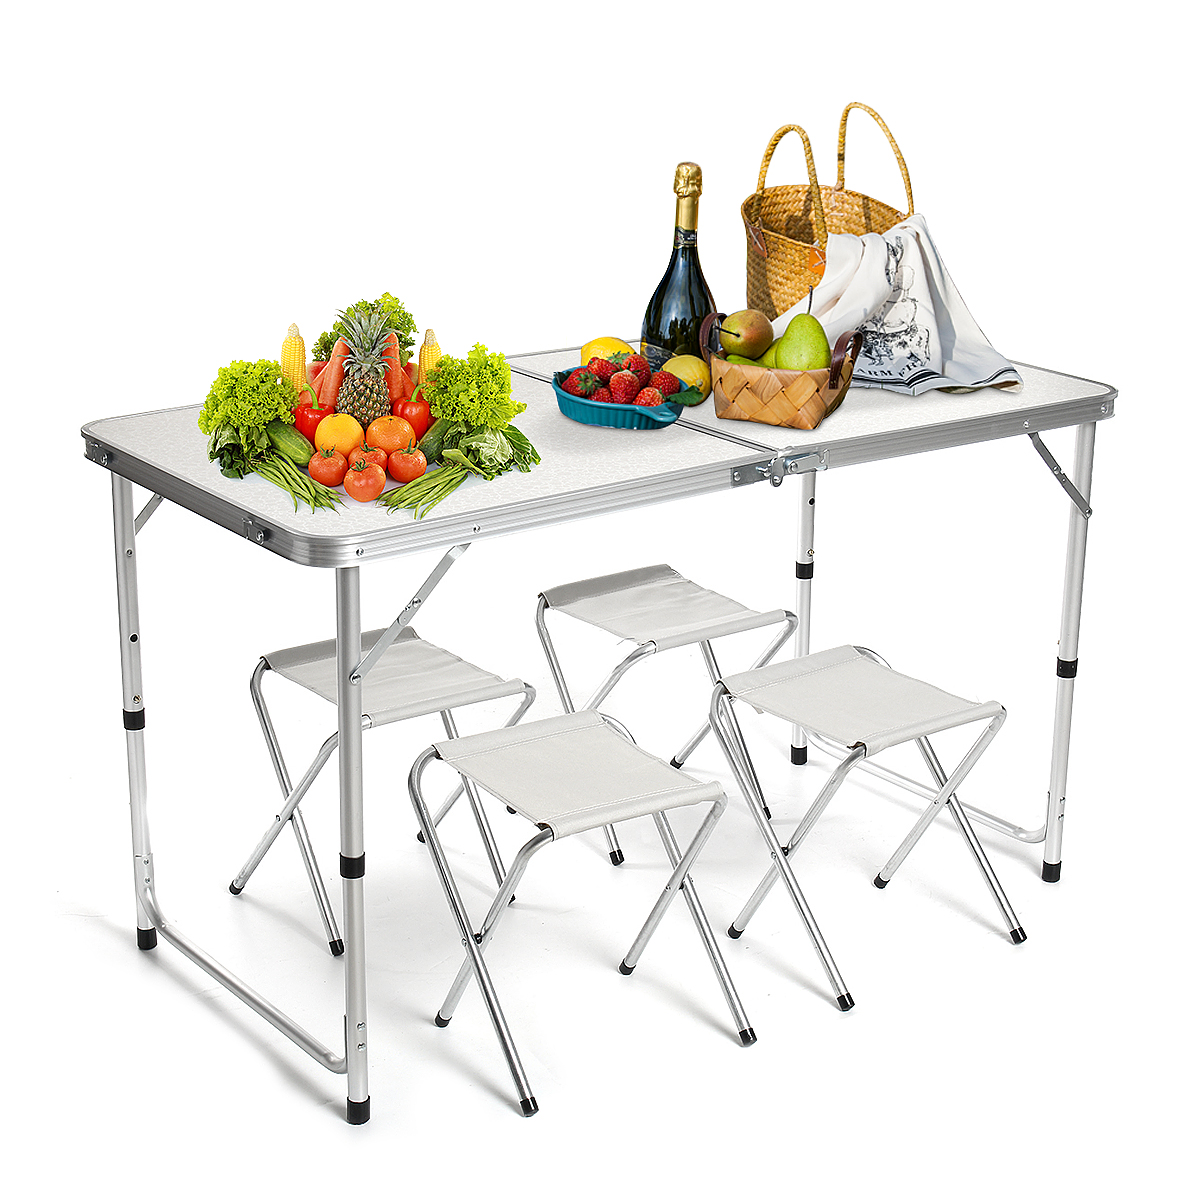 Folding Table 4ft Aluminum Camping Table Chair Set, Portable Picnic Card Table, Three Heights Adjustable Legs-47.24''x23.62'' - image 2 of 10